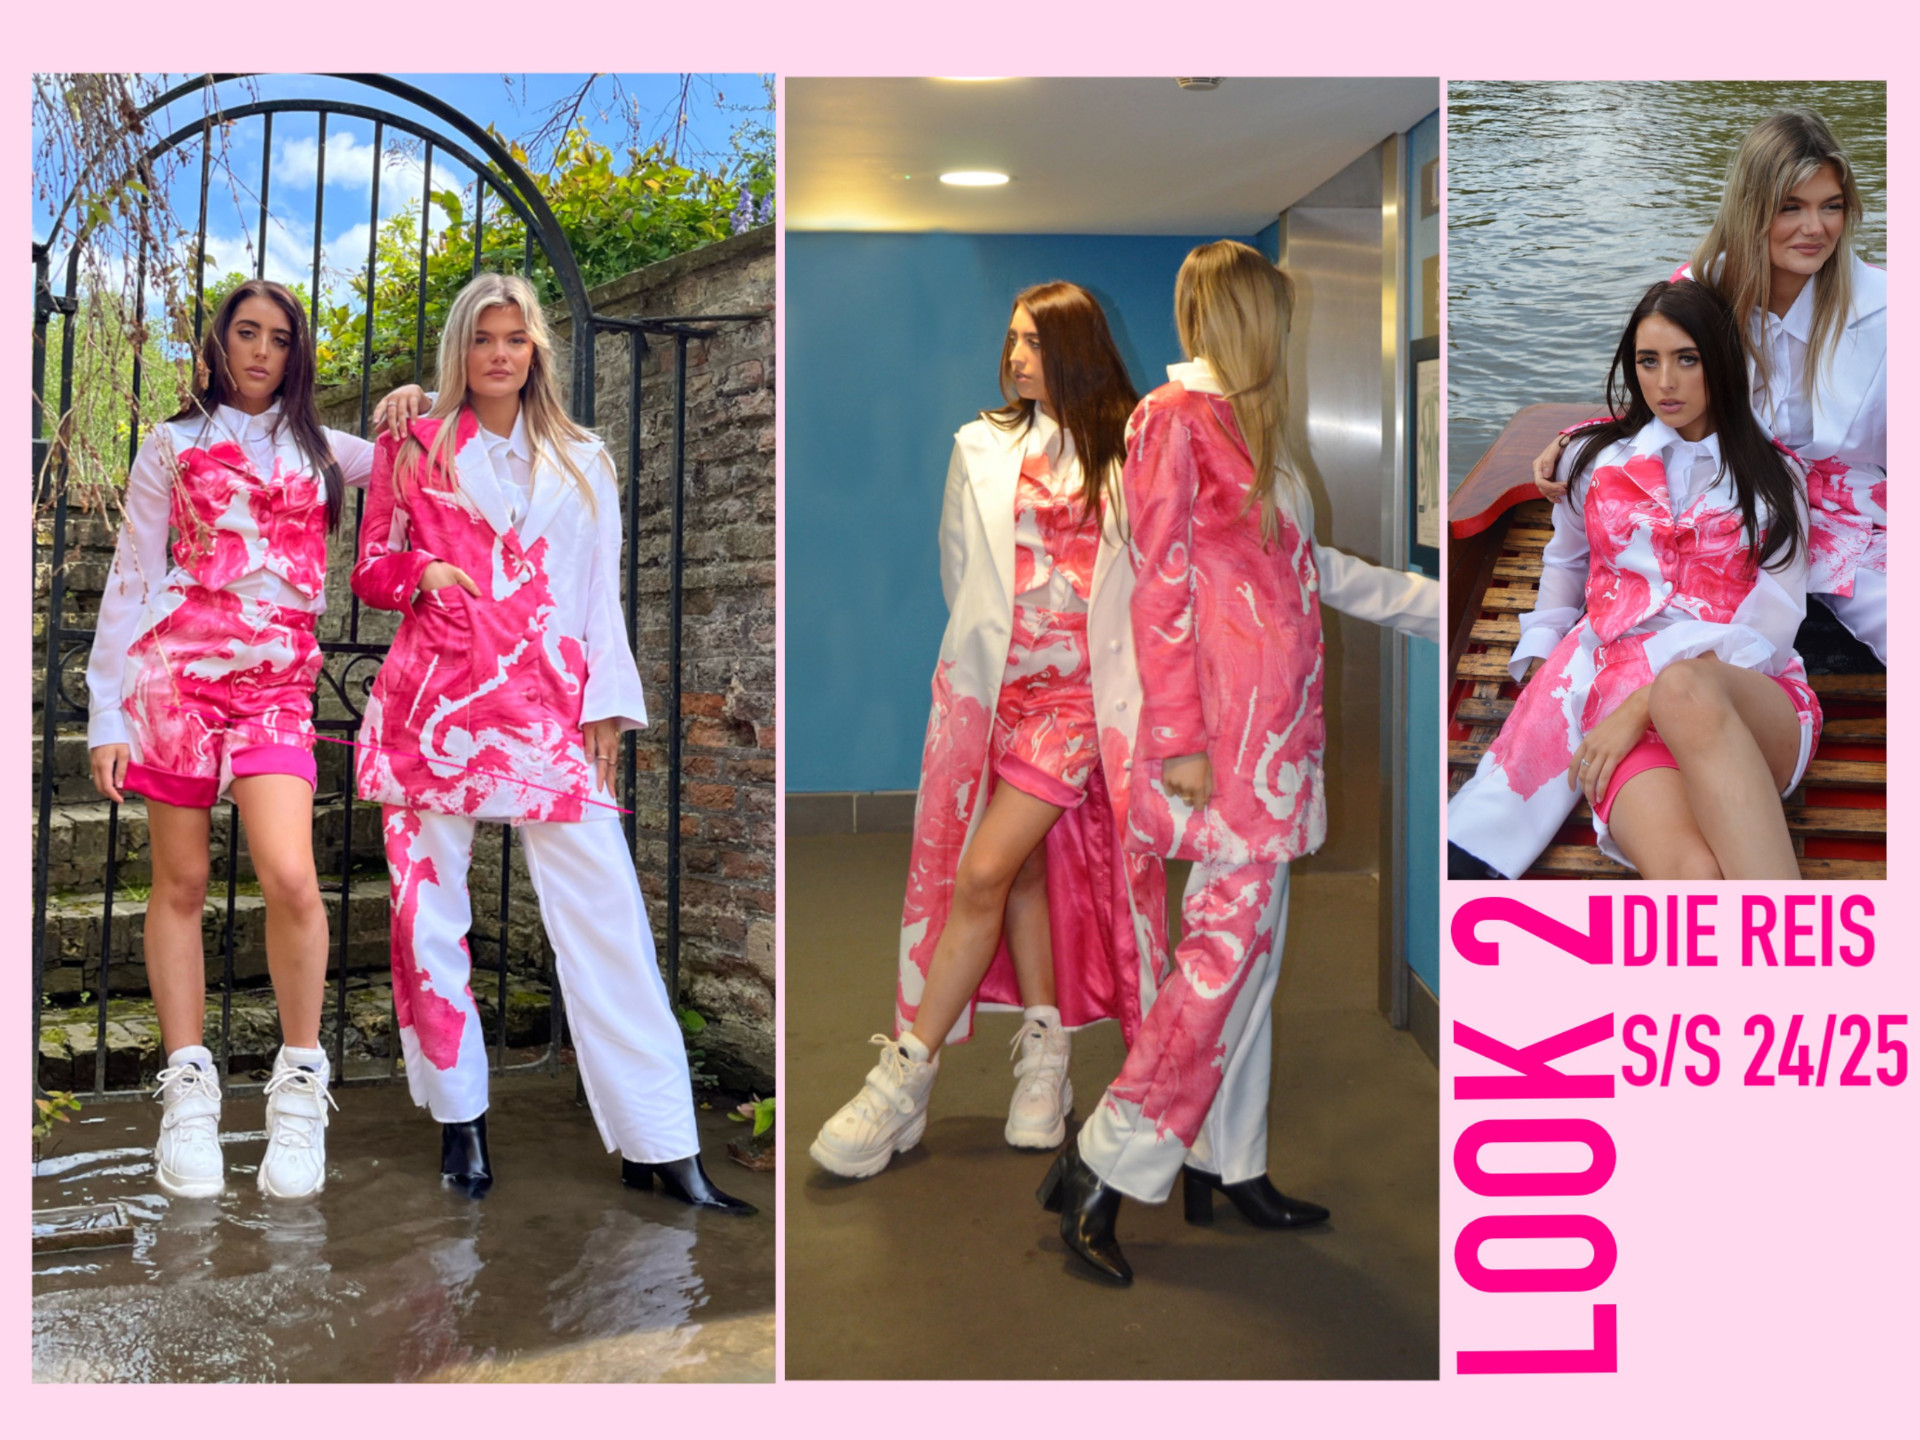 Three photos of two female models wearing pink and white outfits